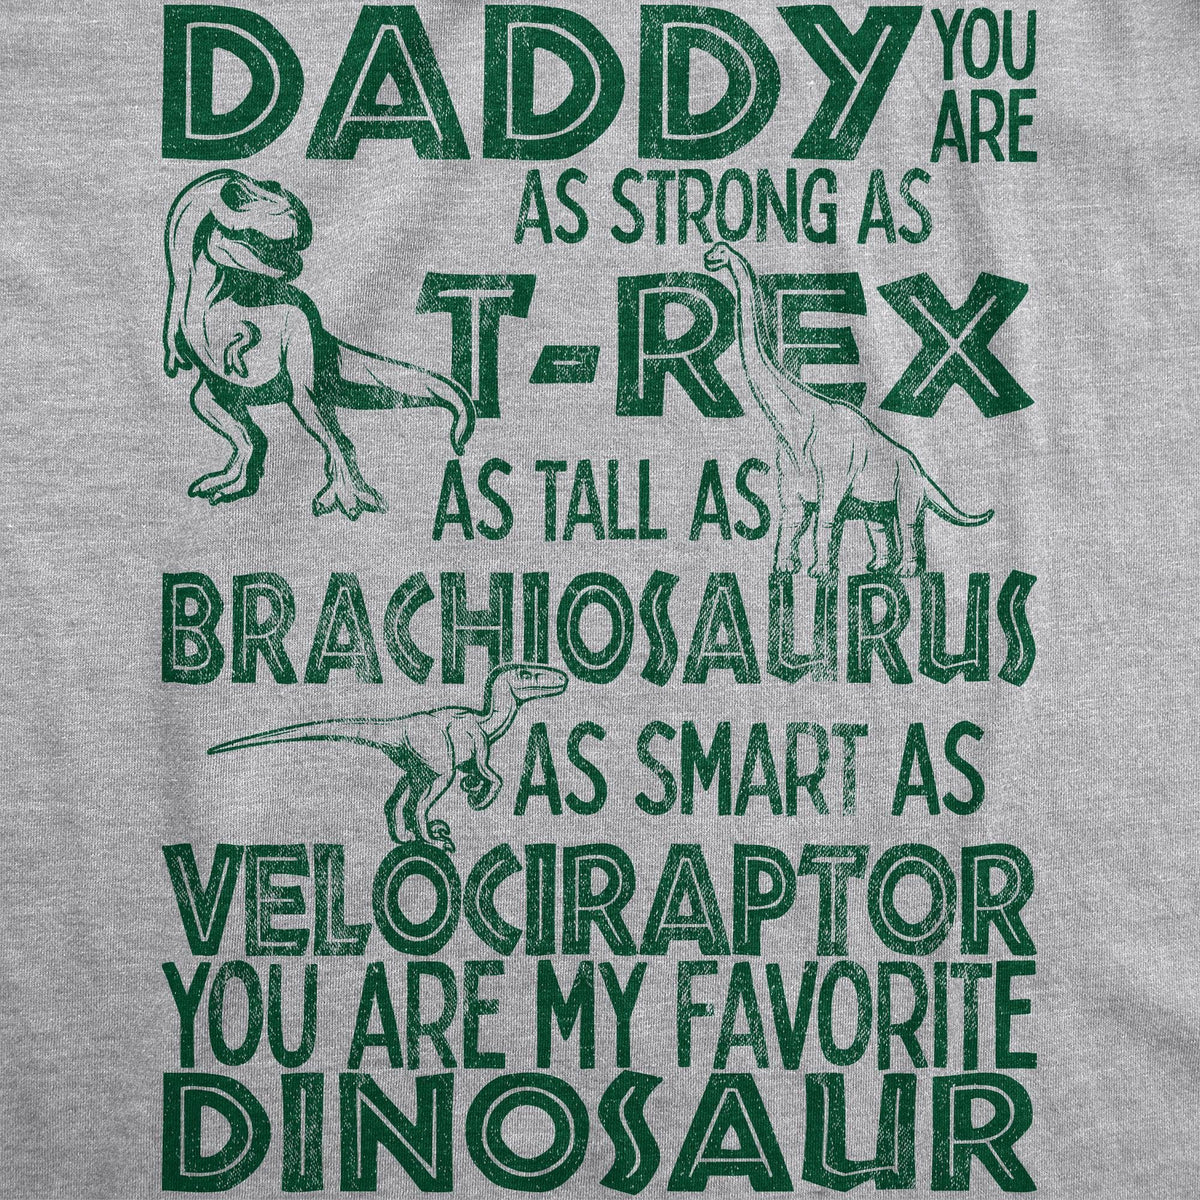 Daddy You Are My Favorite Dinosaur Men&#39;s Tshirt  -  Crazy Dog T-Shirts